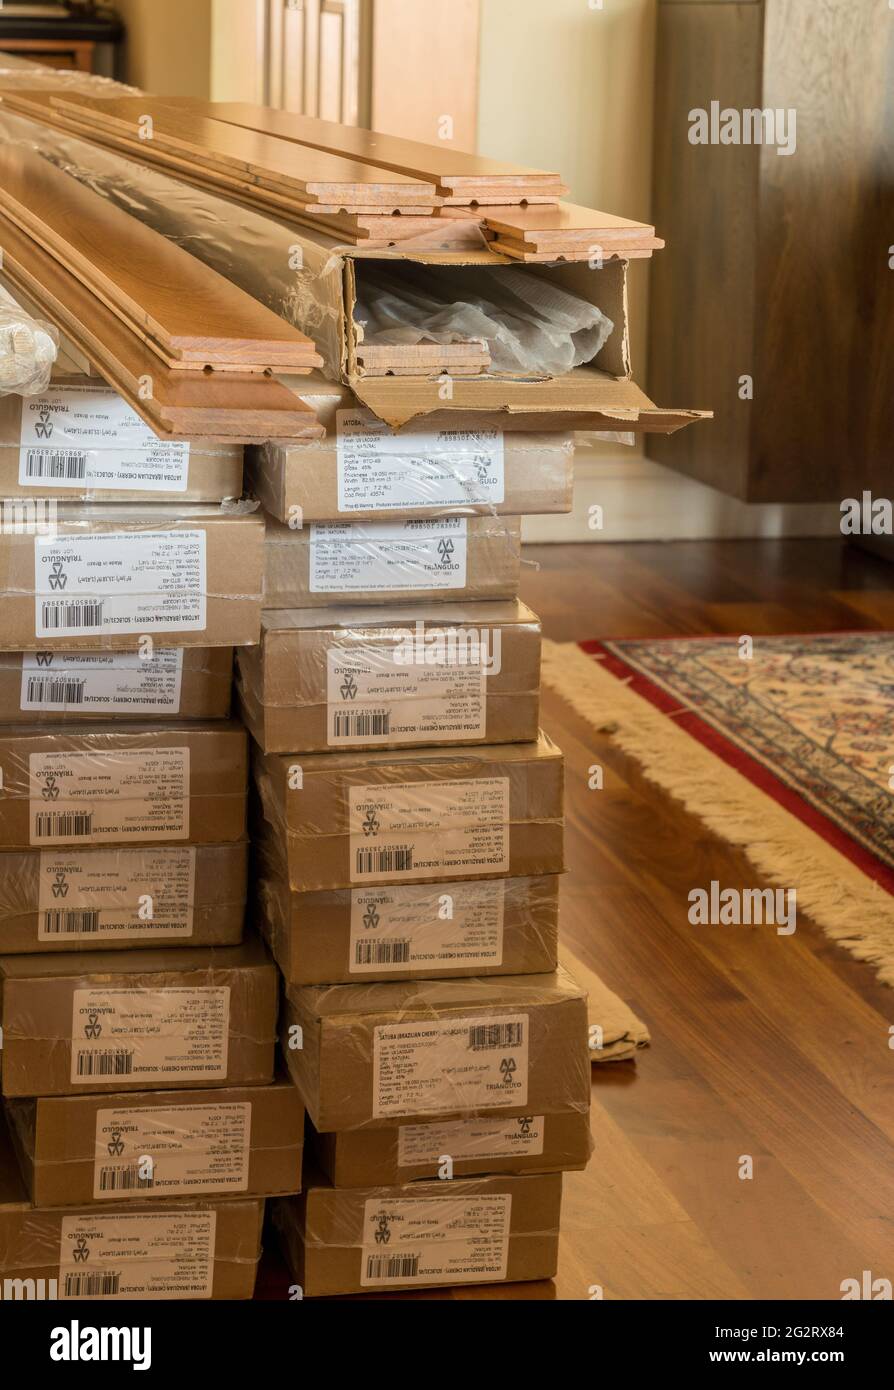 Morgantown, WV - 6 June 2021: Stack of boxes of Brazilian Cherry exotic hardwood flooring planks ready for installation Stock Photo